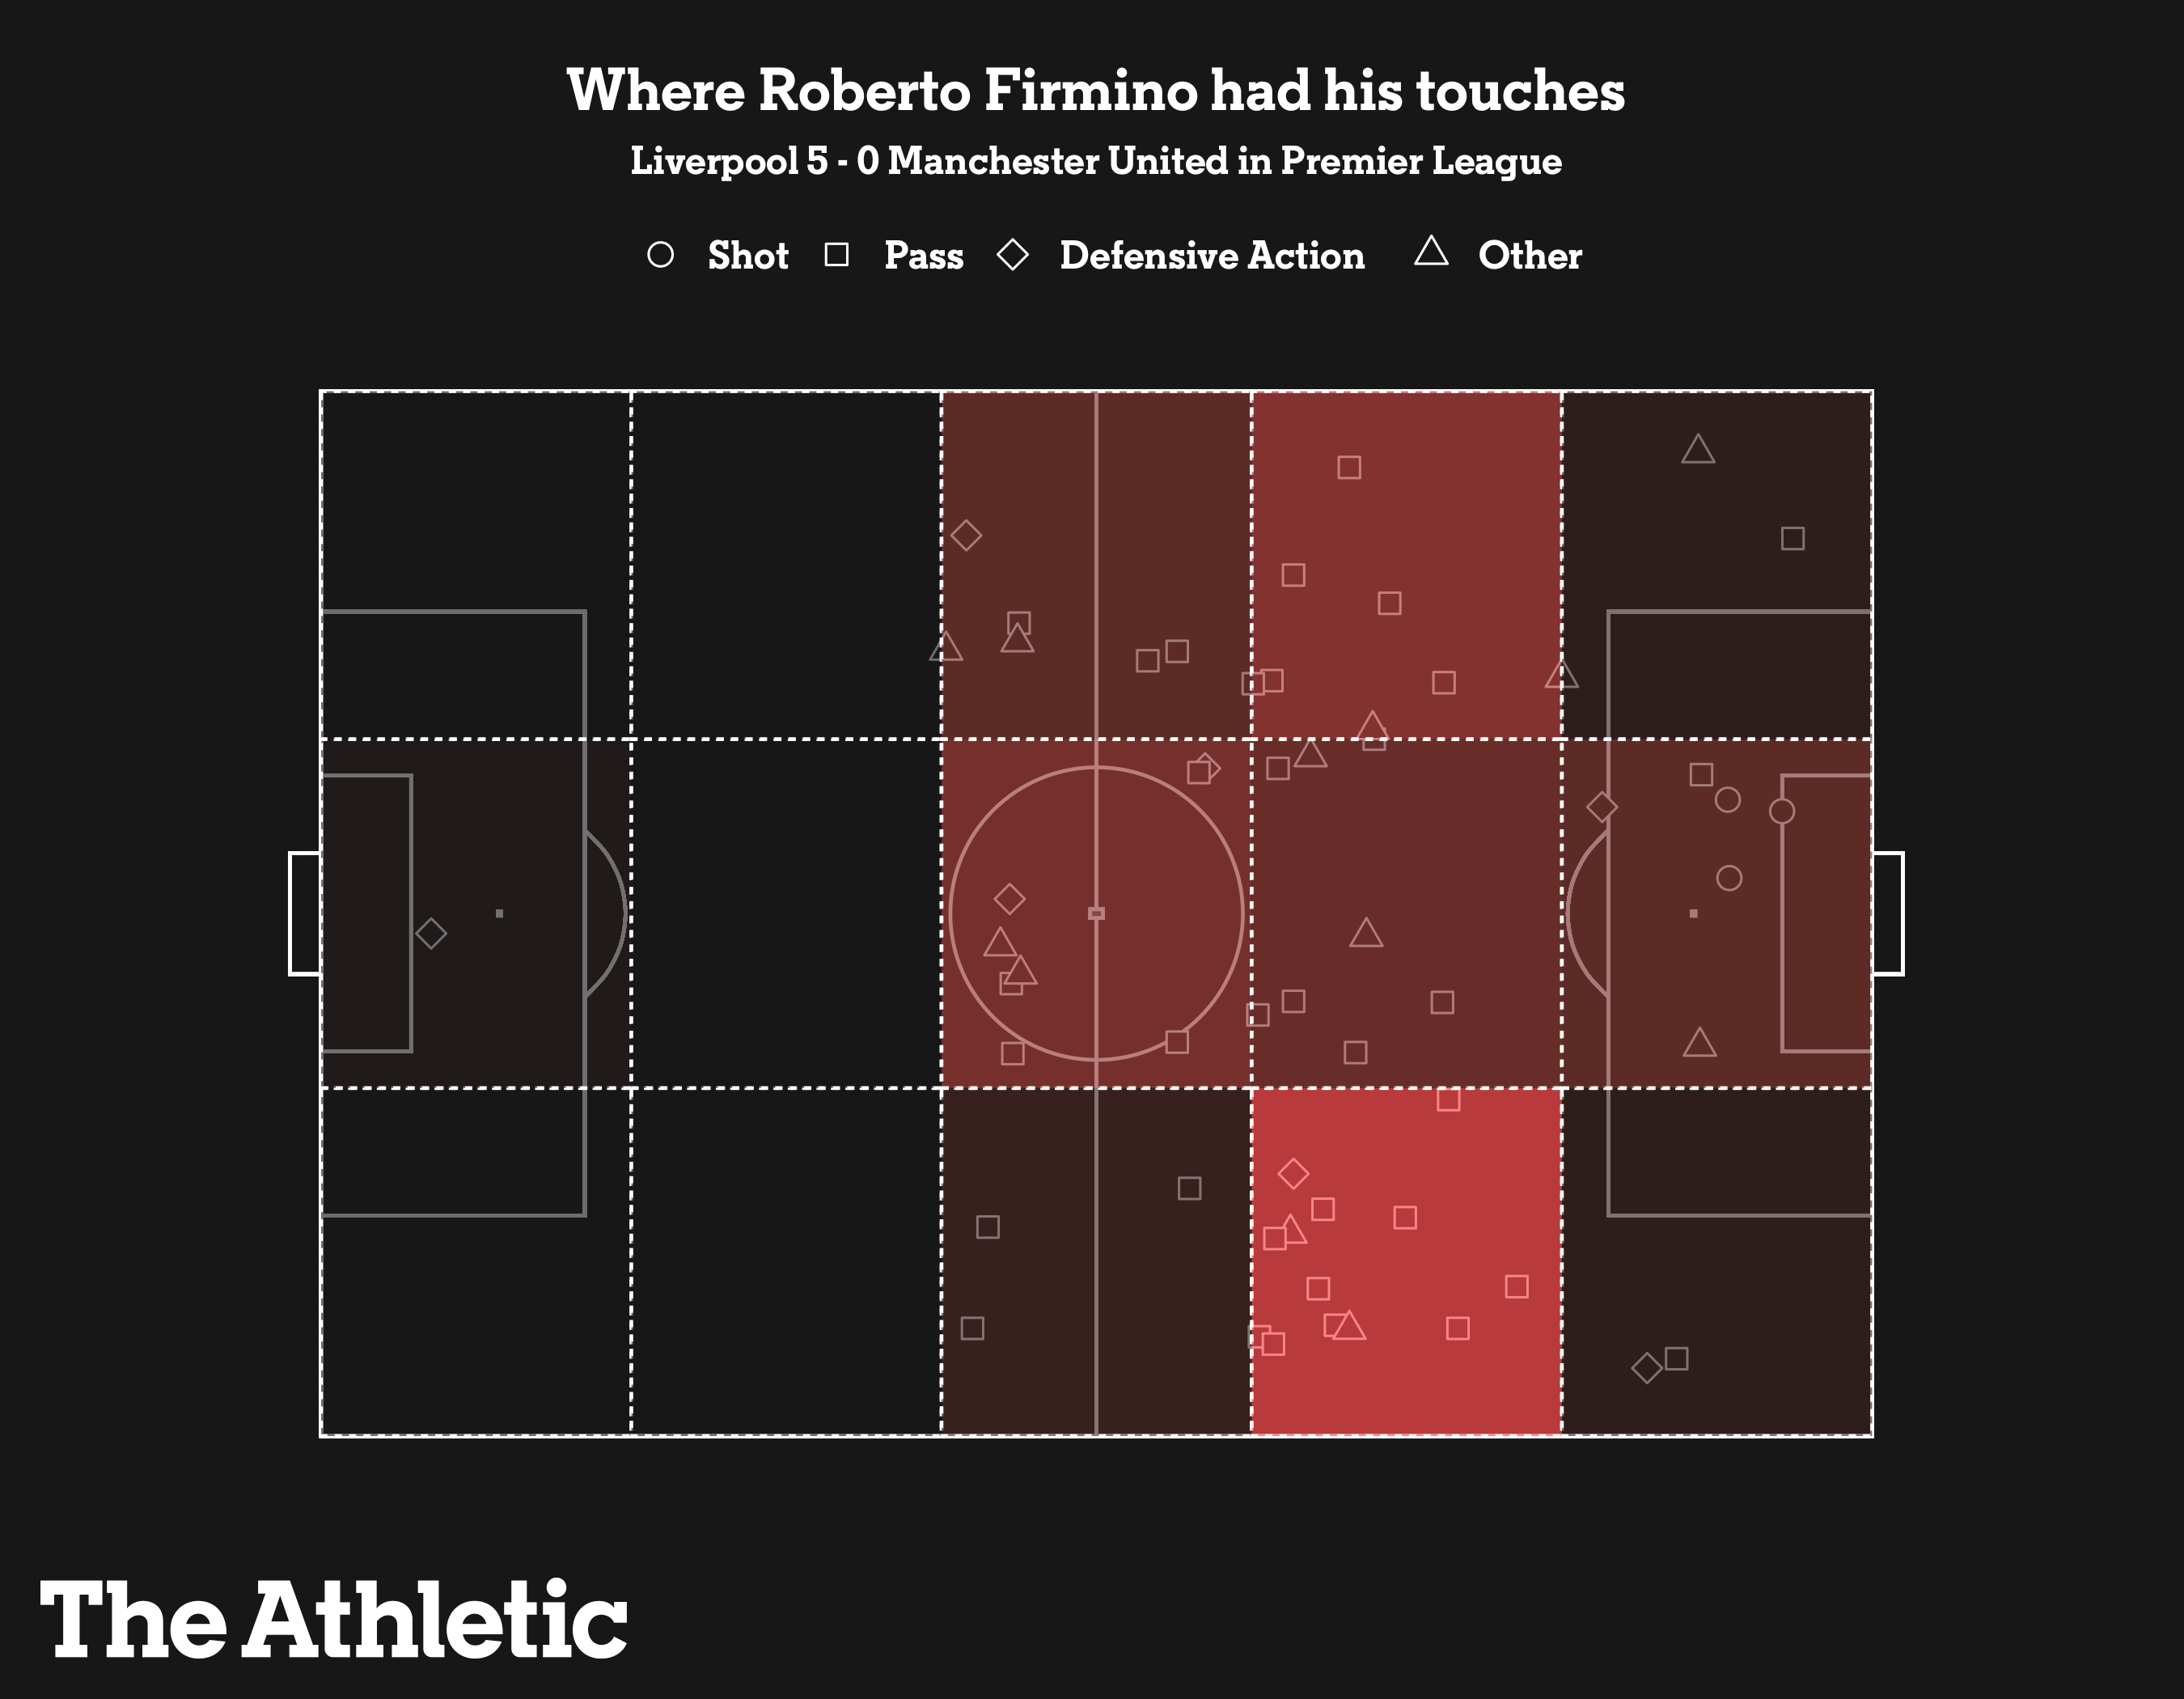 roberto_firmino_liverpool_5_-_0_manchester_united_in_premier_league_touchmap-1.png